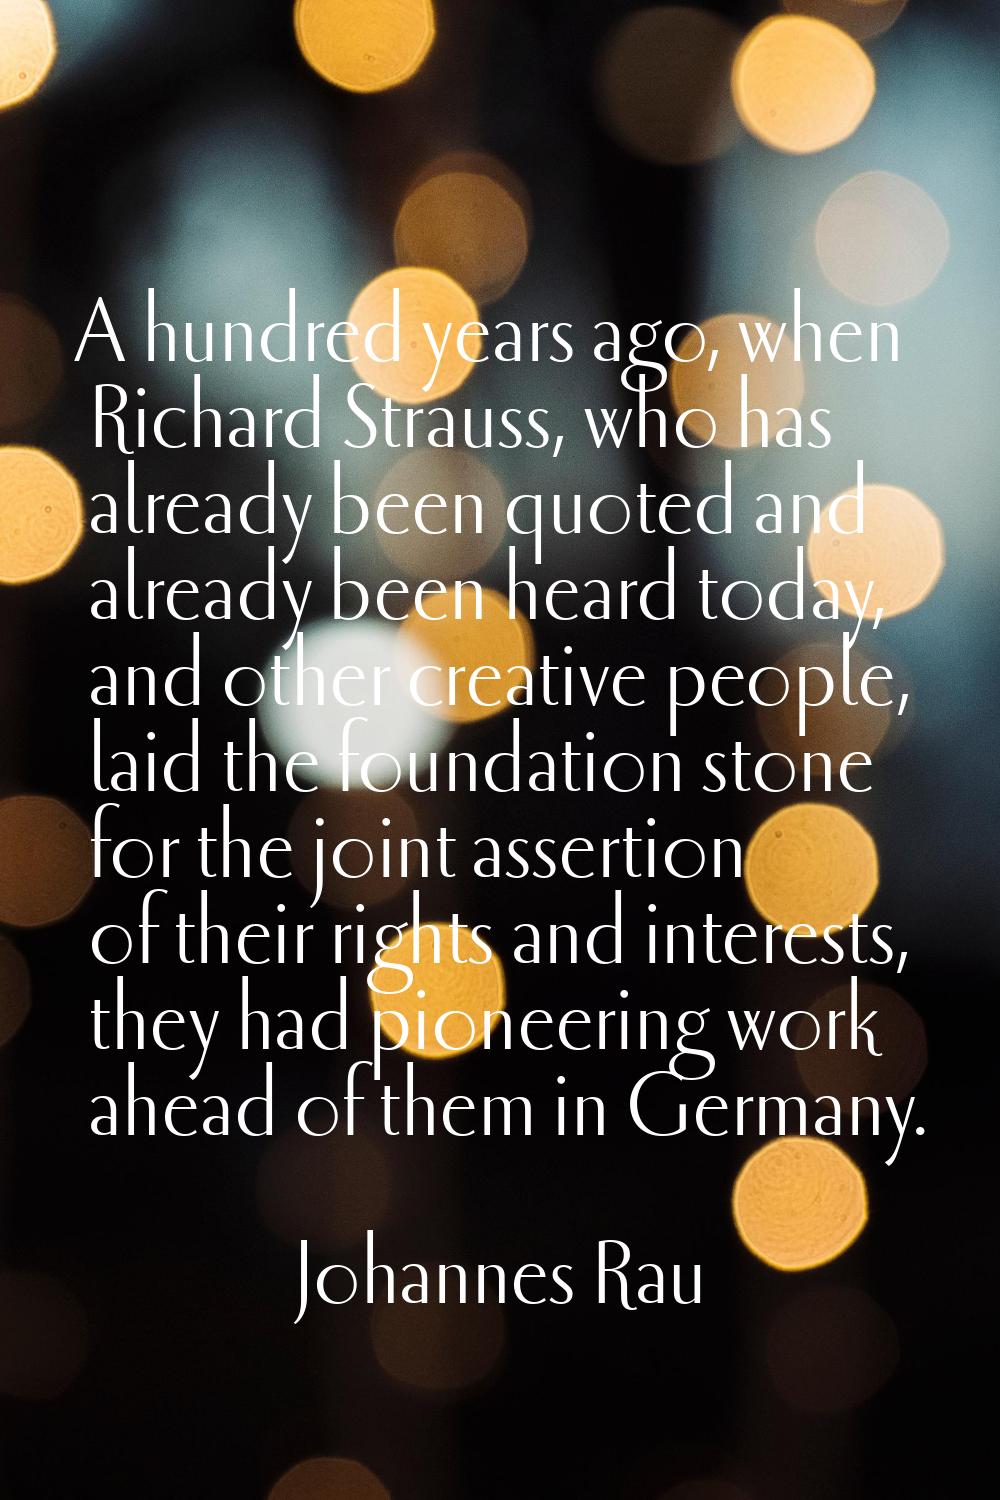 A hundred years ago, when Richard Strauss, who has already been quoted and already been heard today